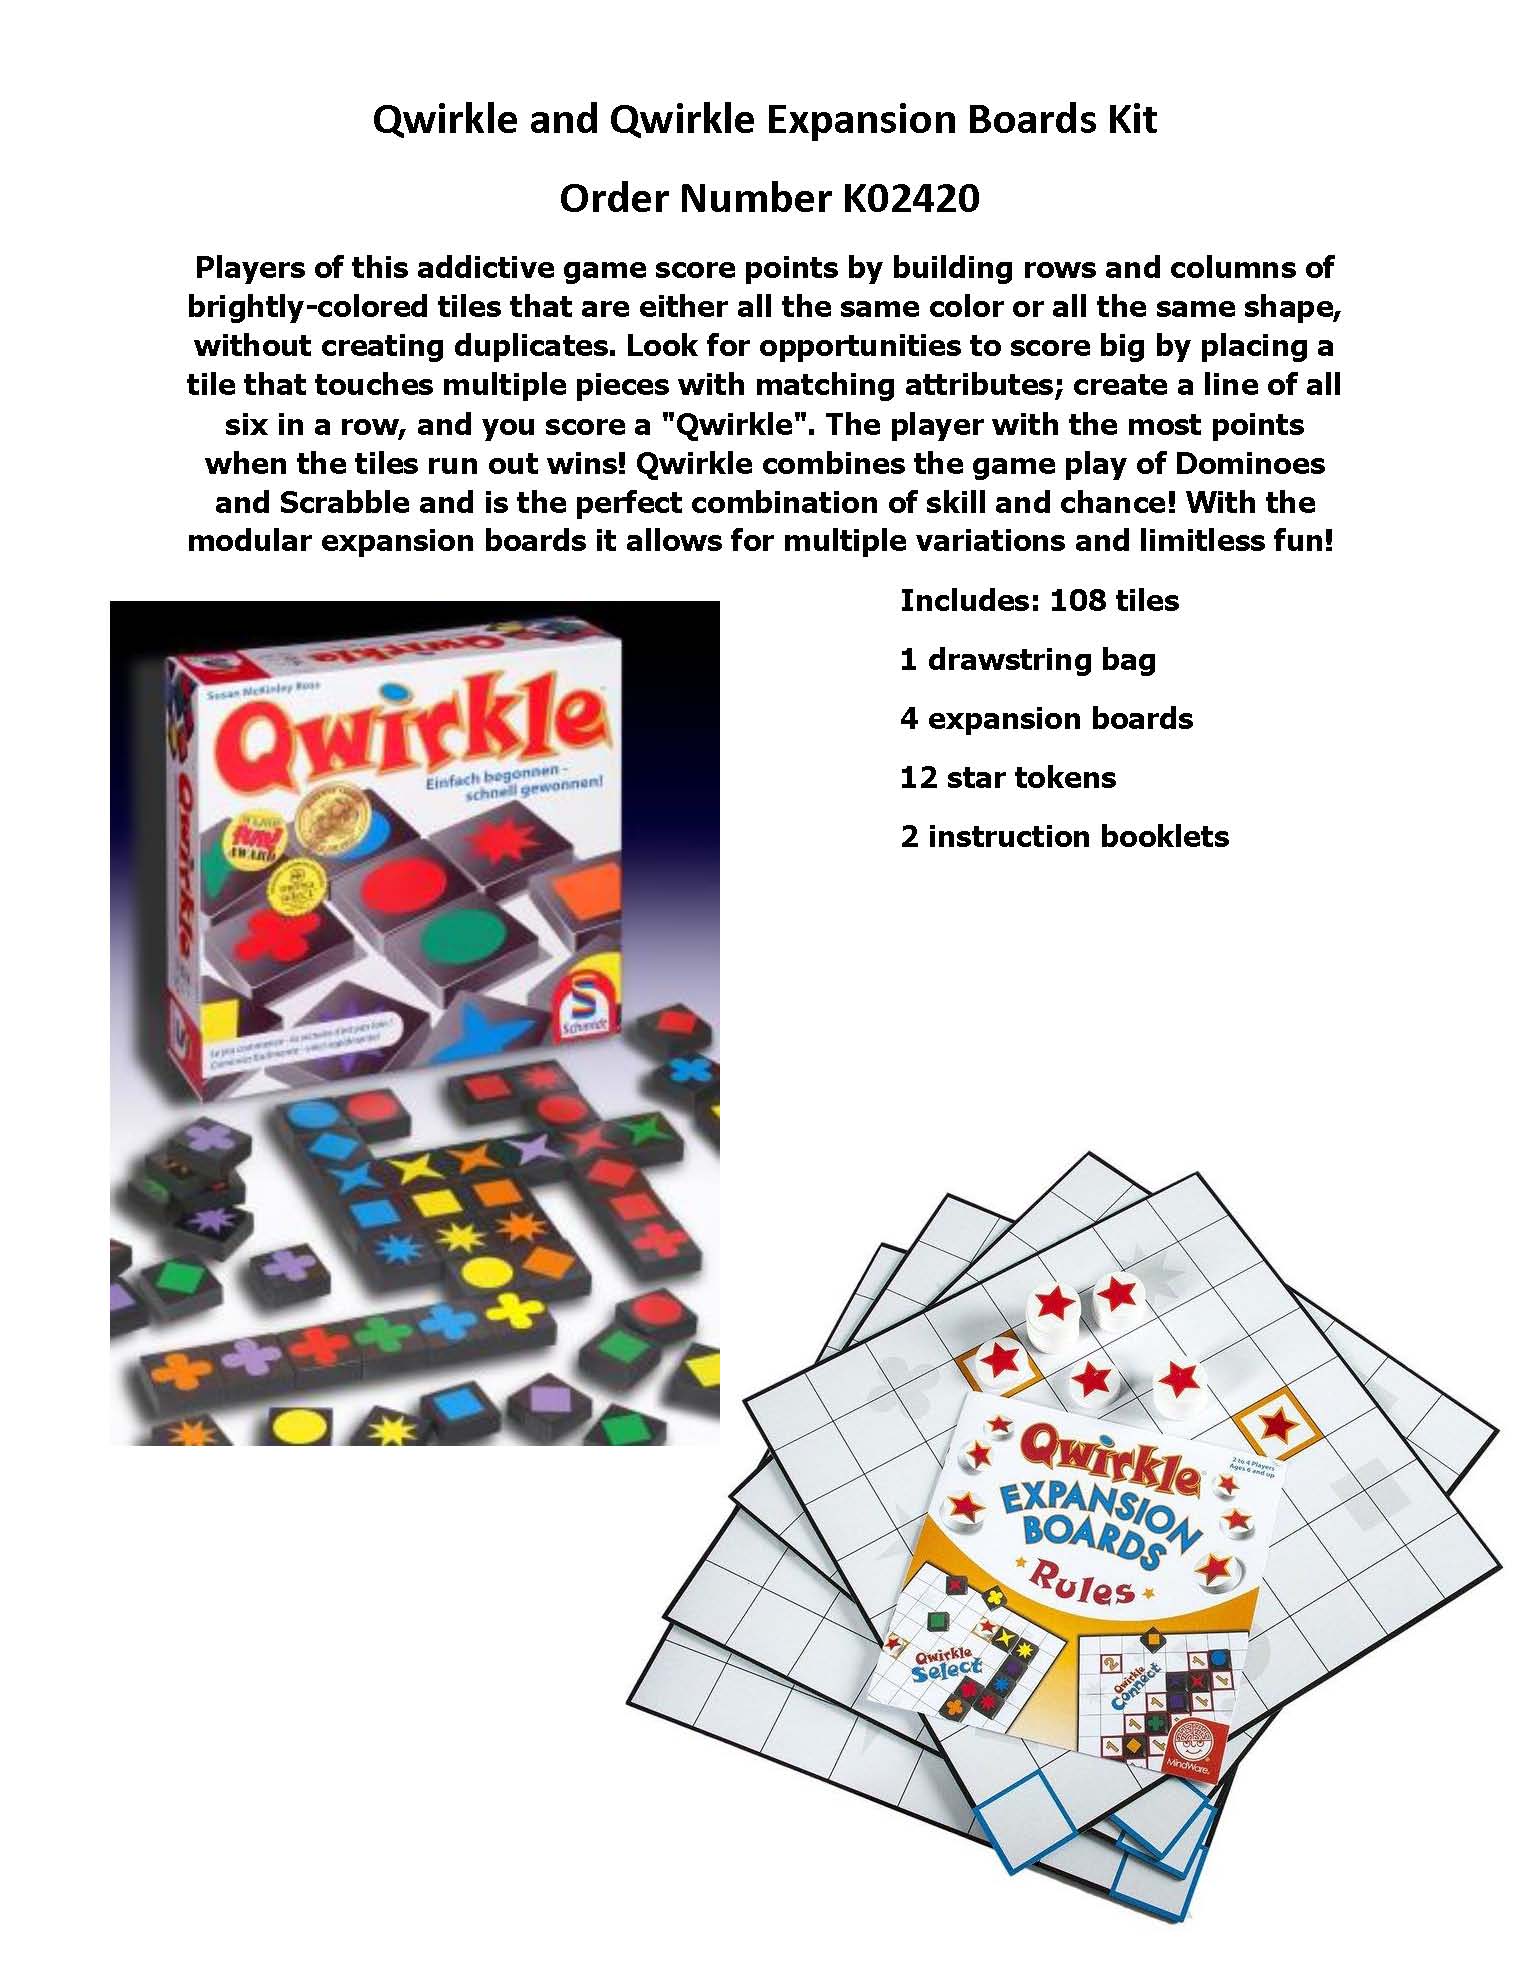 Qwirkle Game and Qwirkle Expansion Boards Kit